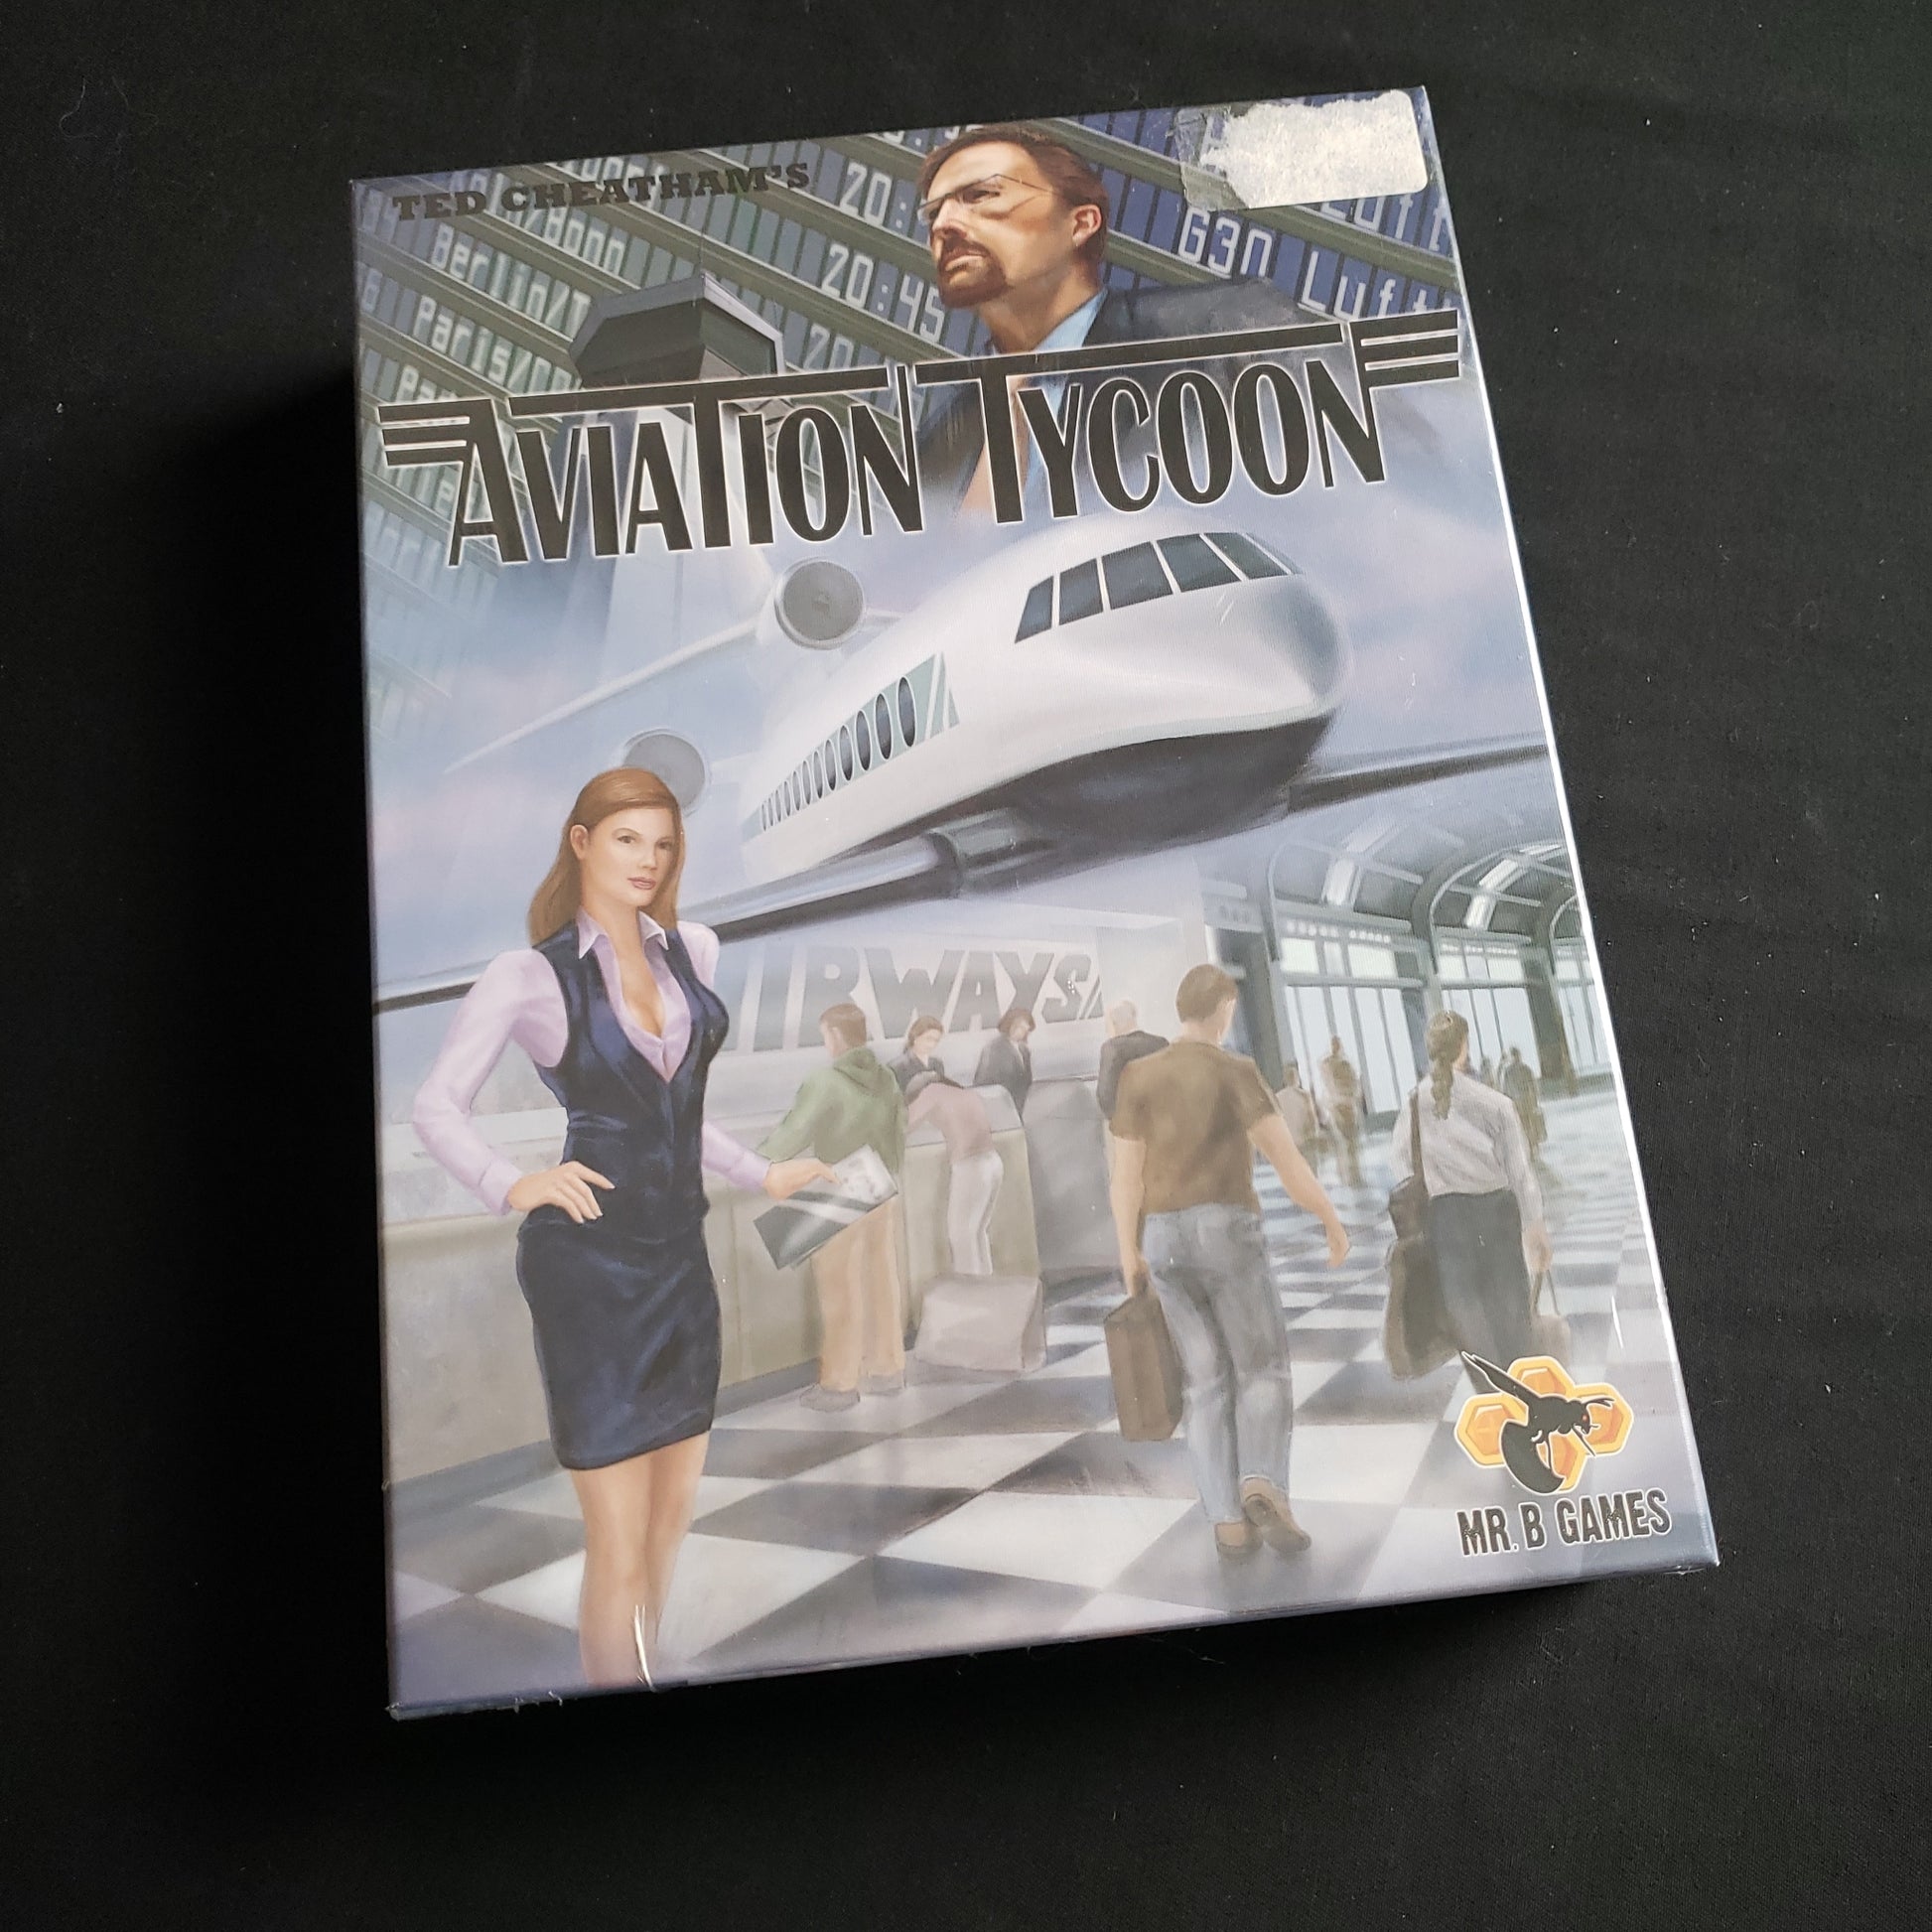 Image shows the front cover of the box of the Aviation Tycoon board game